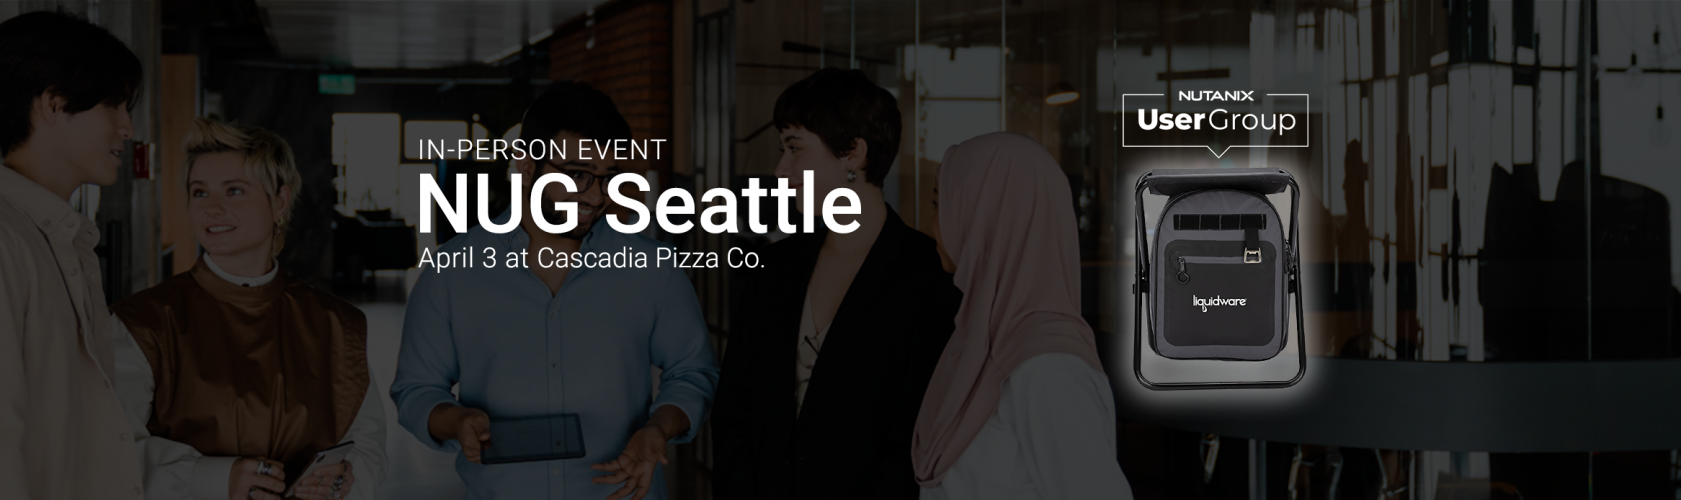 Nutanix User Group in Seattle on April 3rd